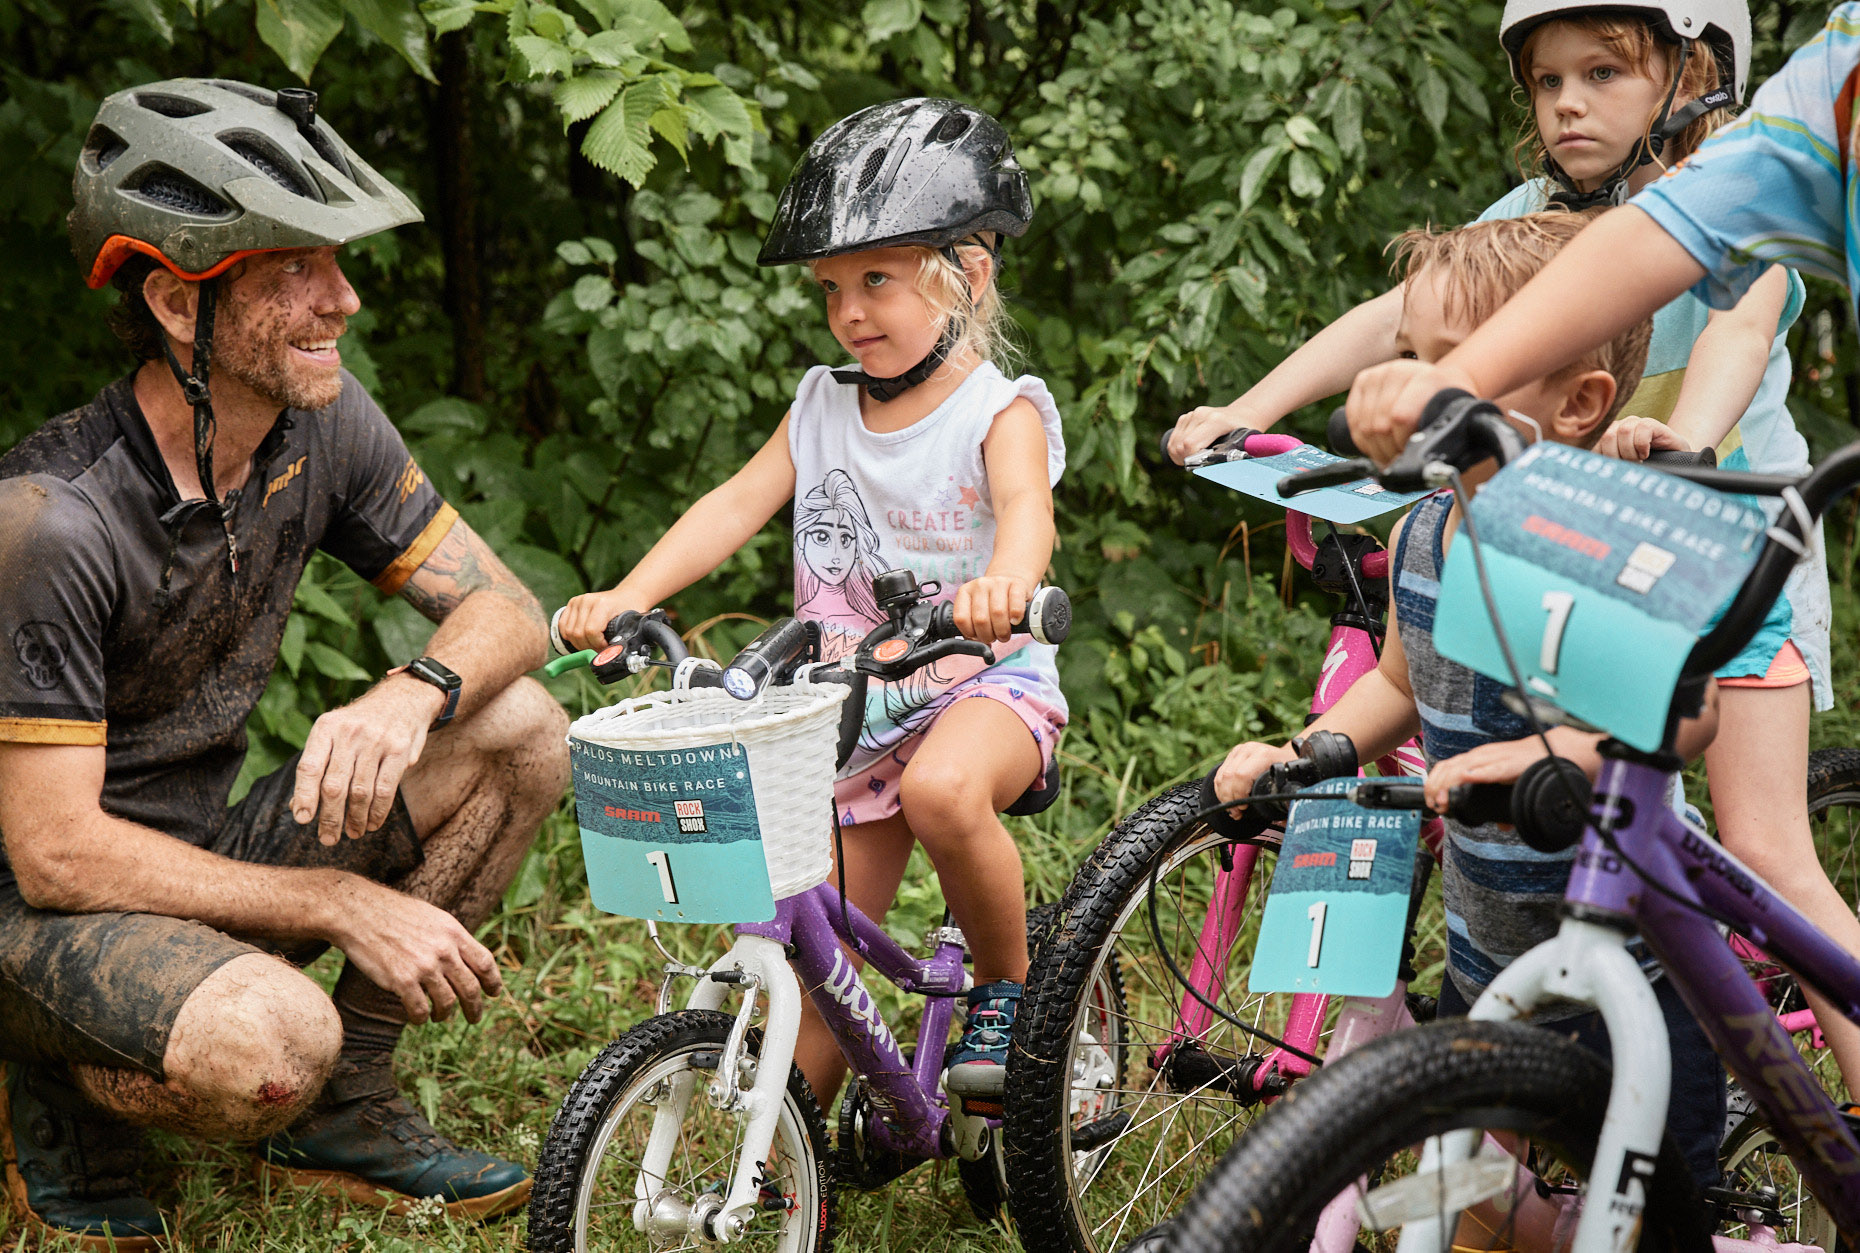 Girl and her father at a bike race | Childrens photography by Saverio Truglia